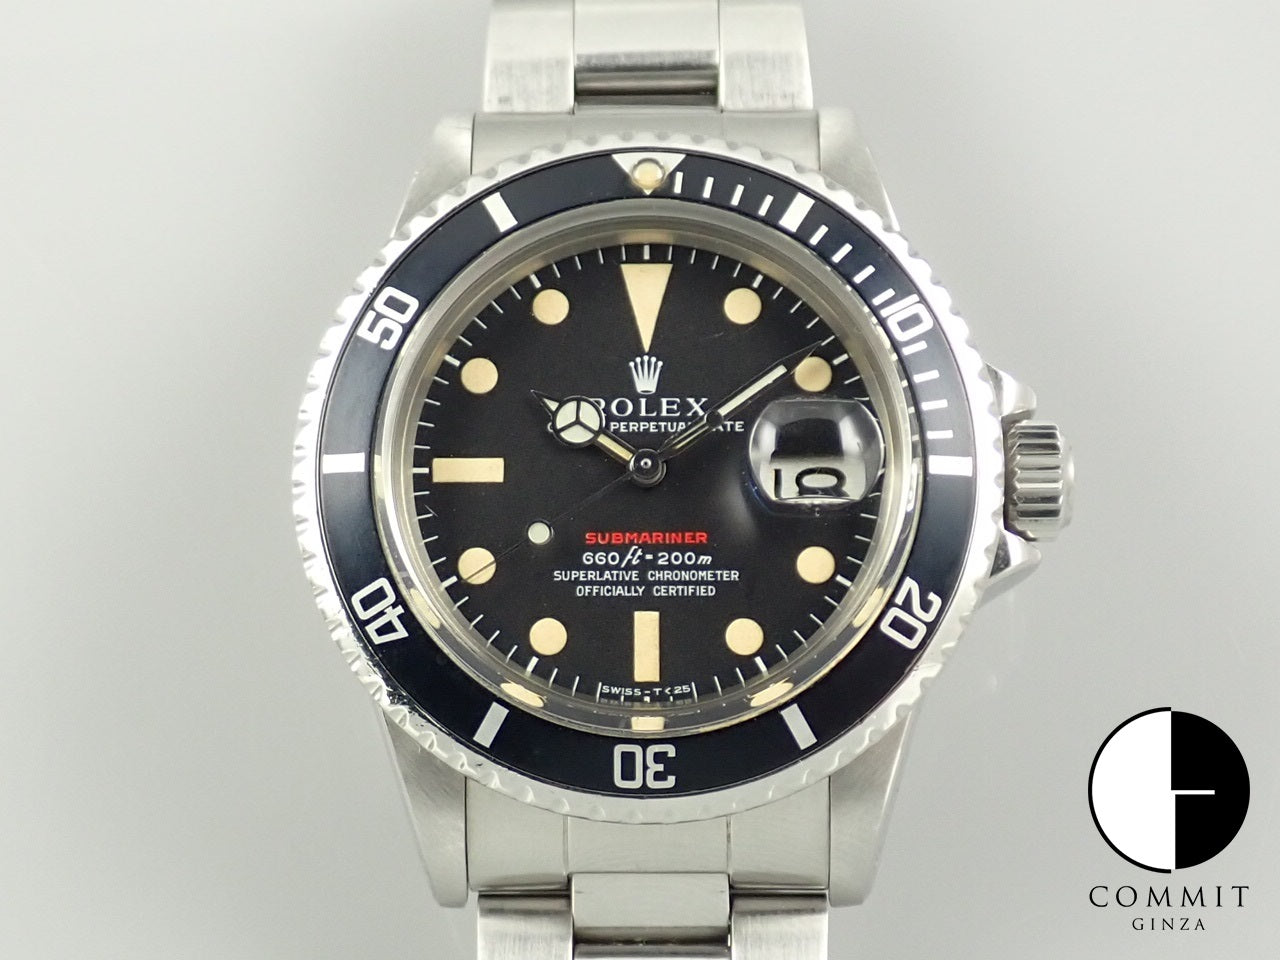 Rolex Red Submariner &lt;Box and other details&gt;